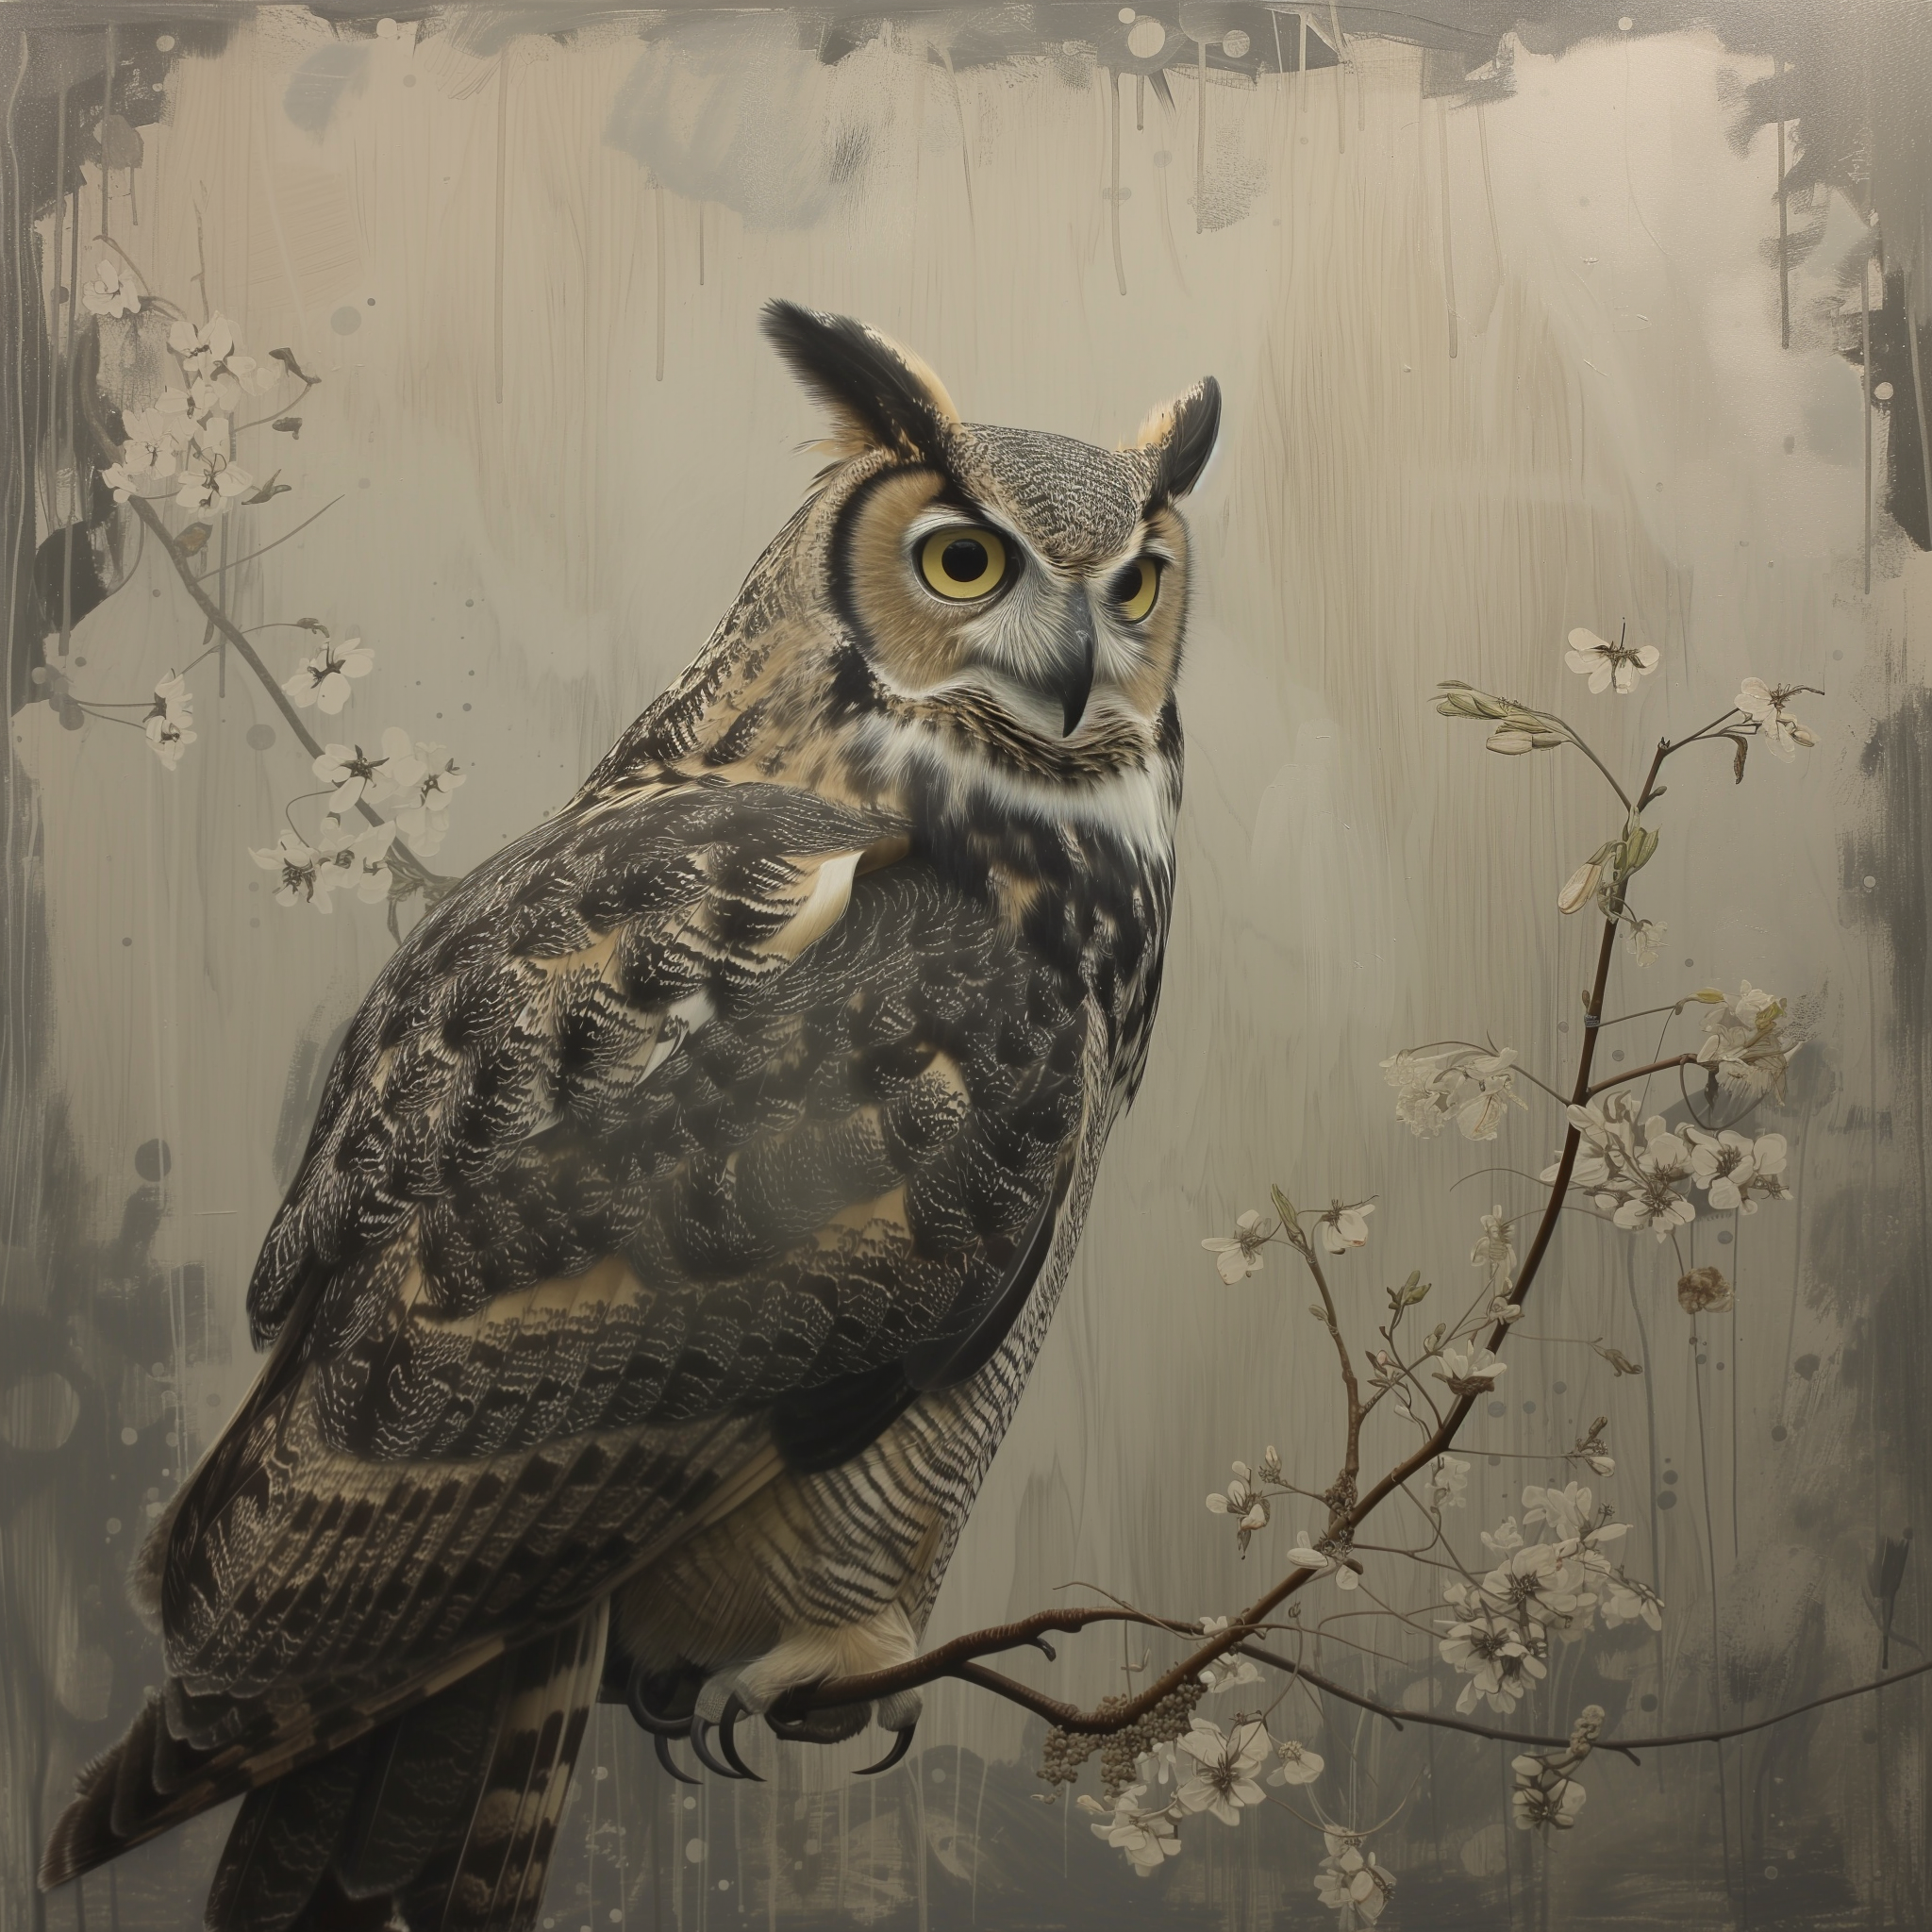 Avatar of a Great Horned Owl perched on a branch, with an artistic, textured beige background.